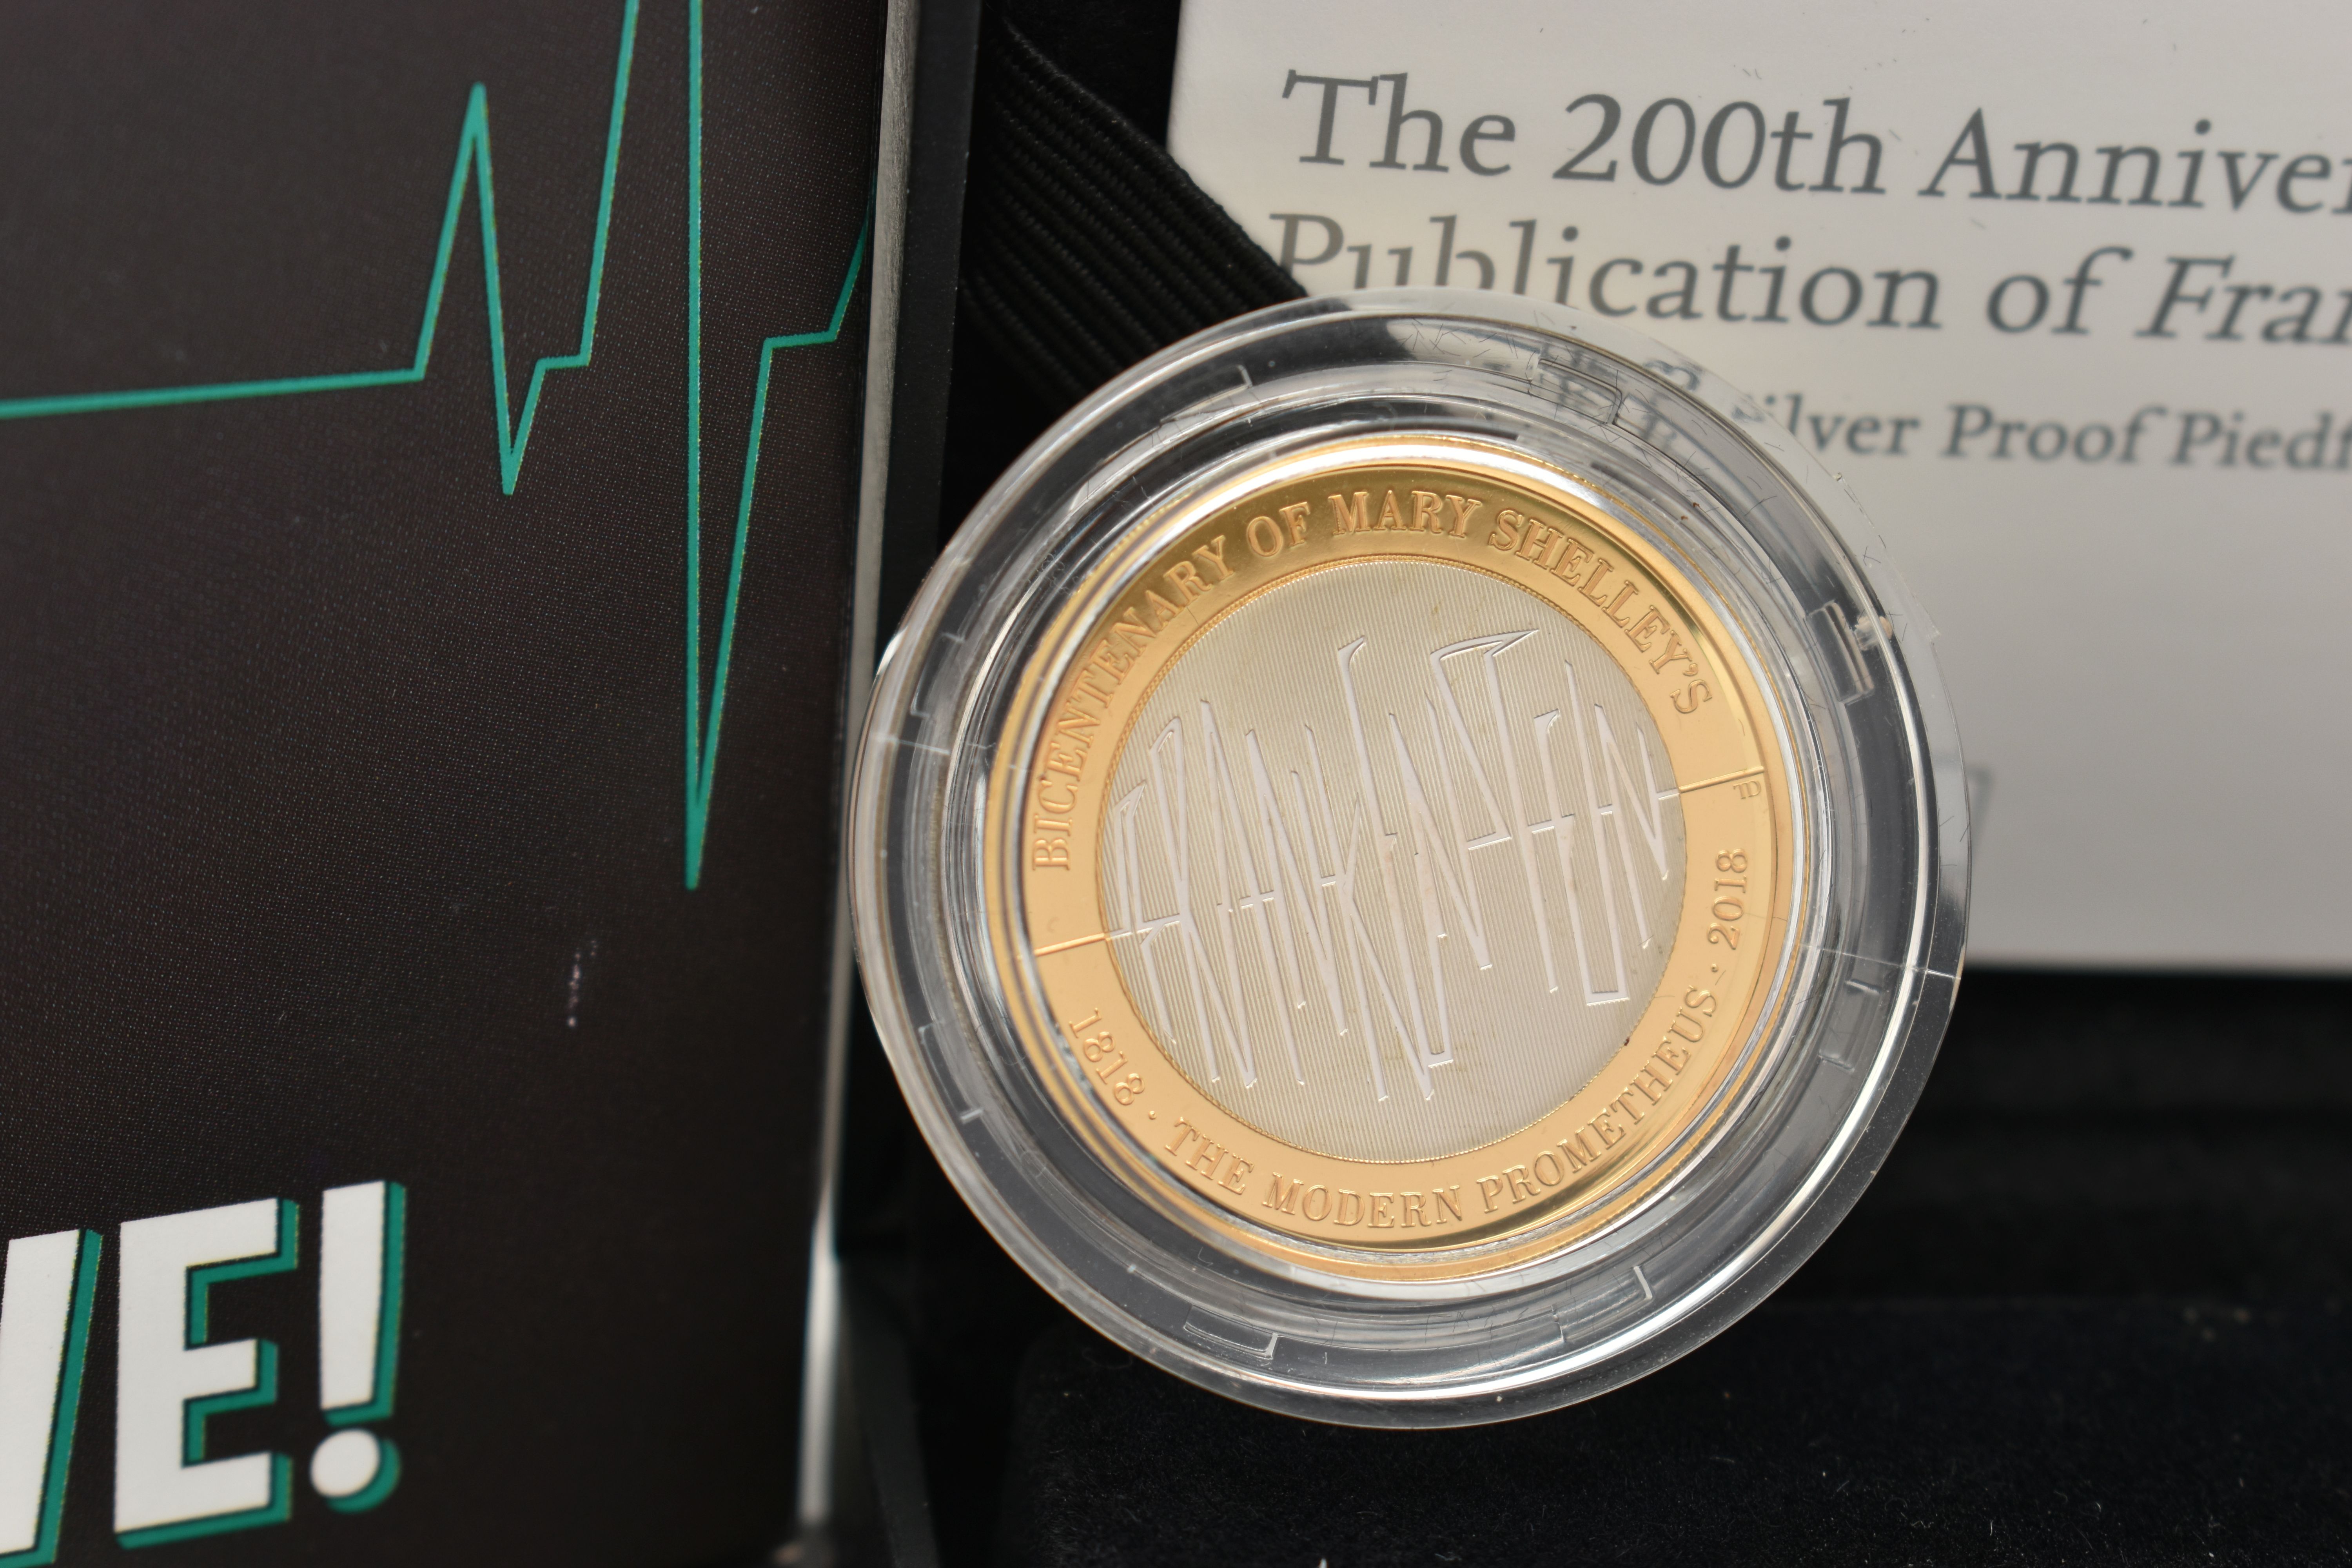 A PARCEL CONTAINING A ROYAL MINT (Mary Shelley's) FRANKENSTEIN PIEDFORT SILVER PROOF £2 COIN, - Image 2 of 5